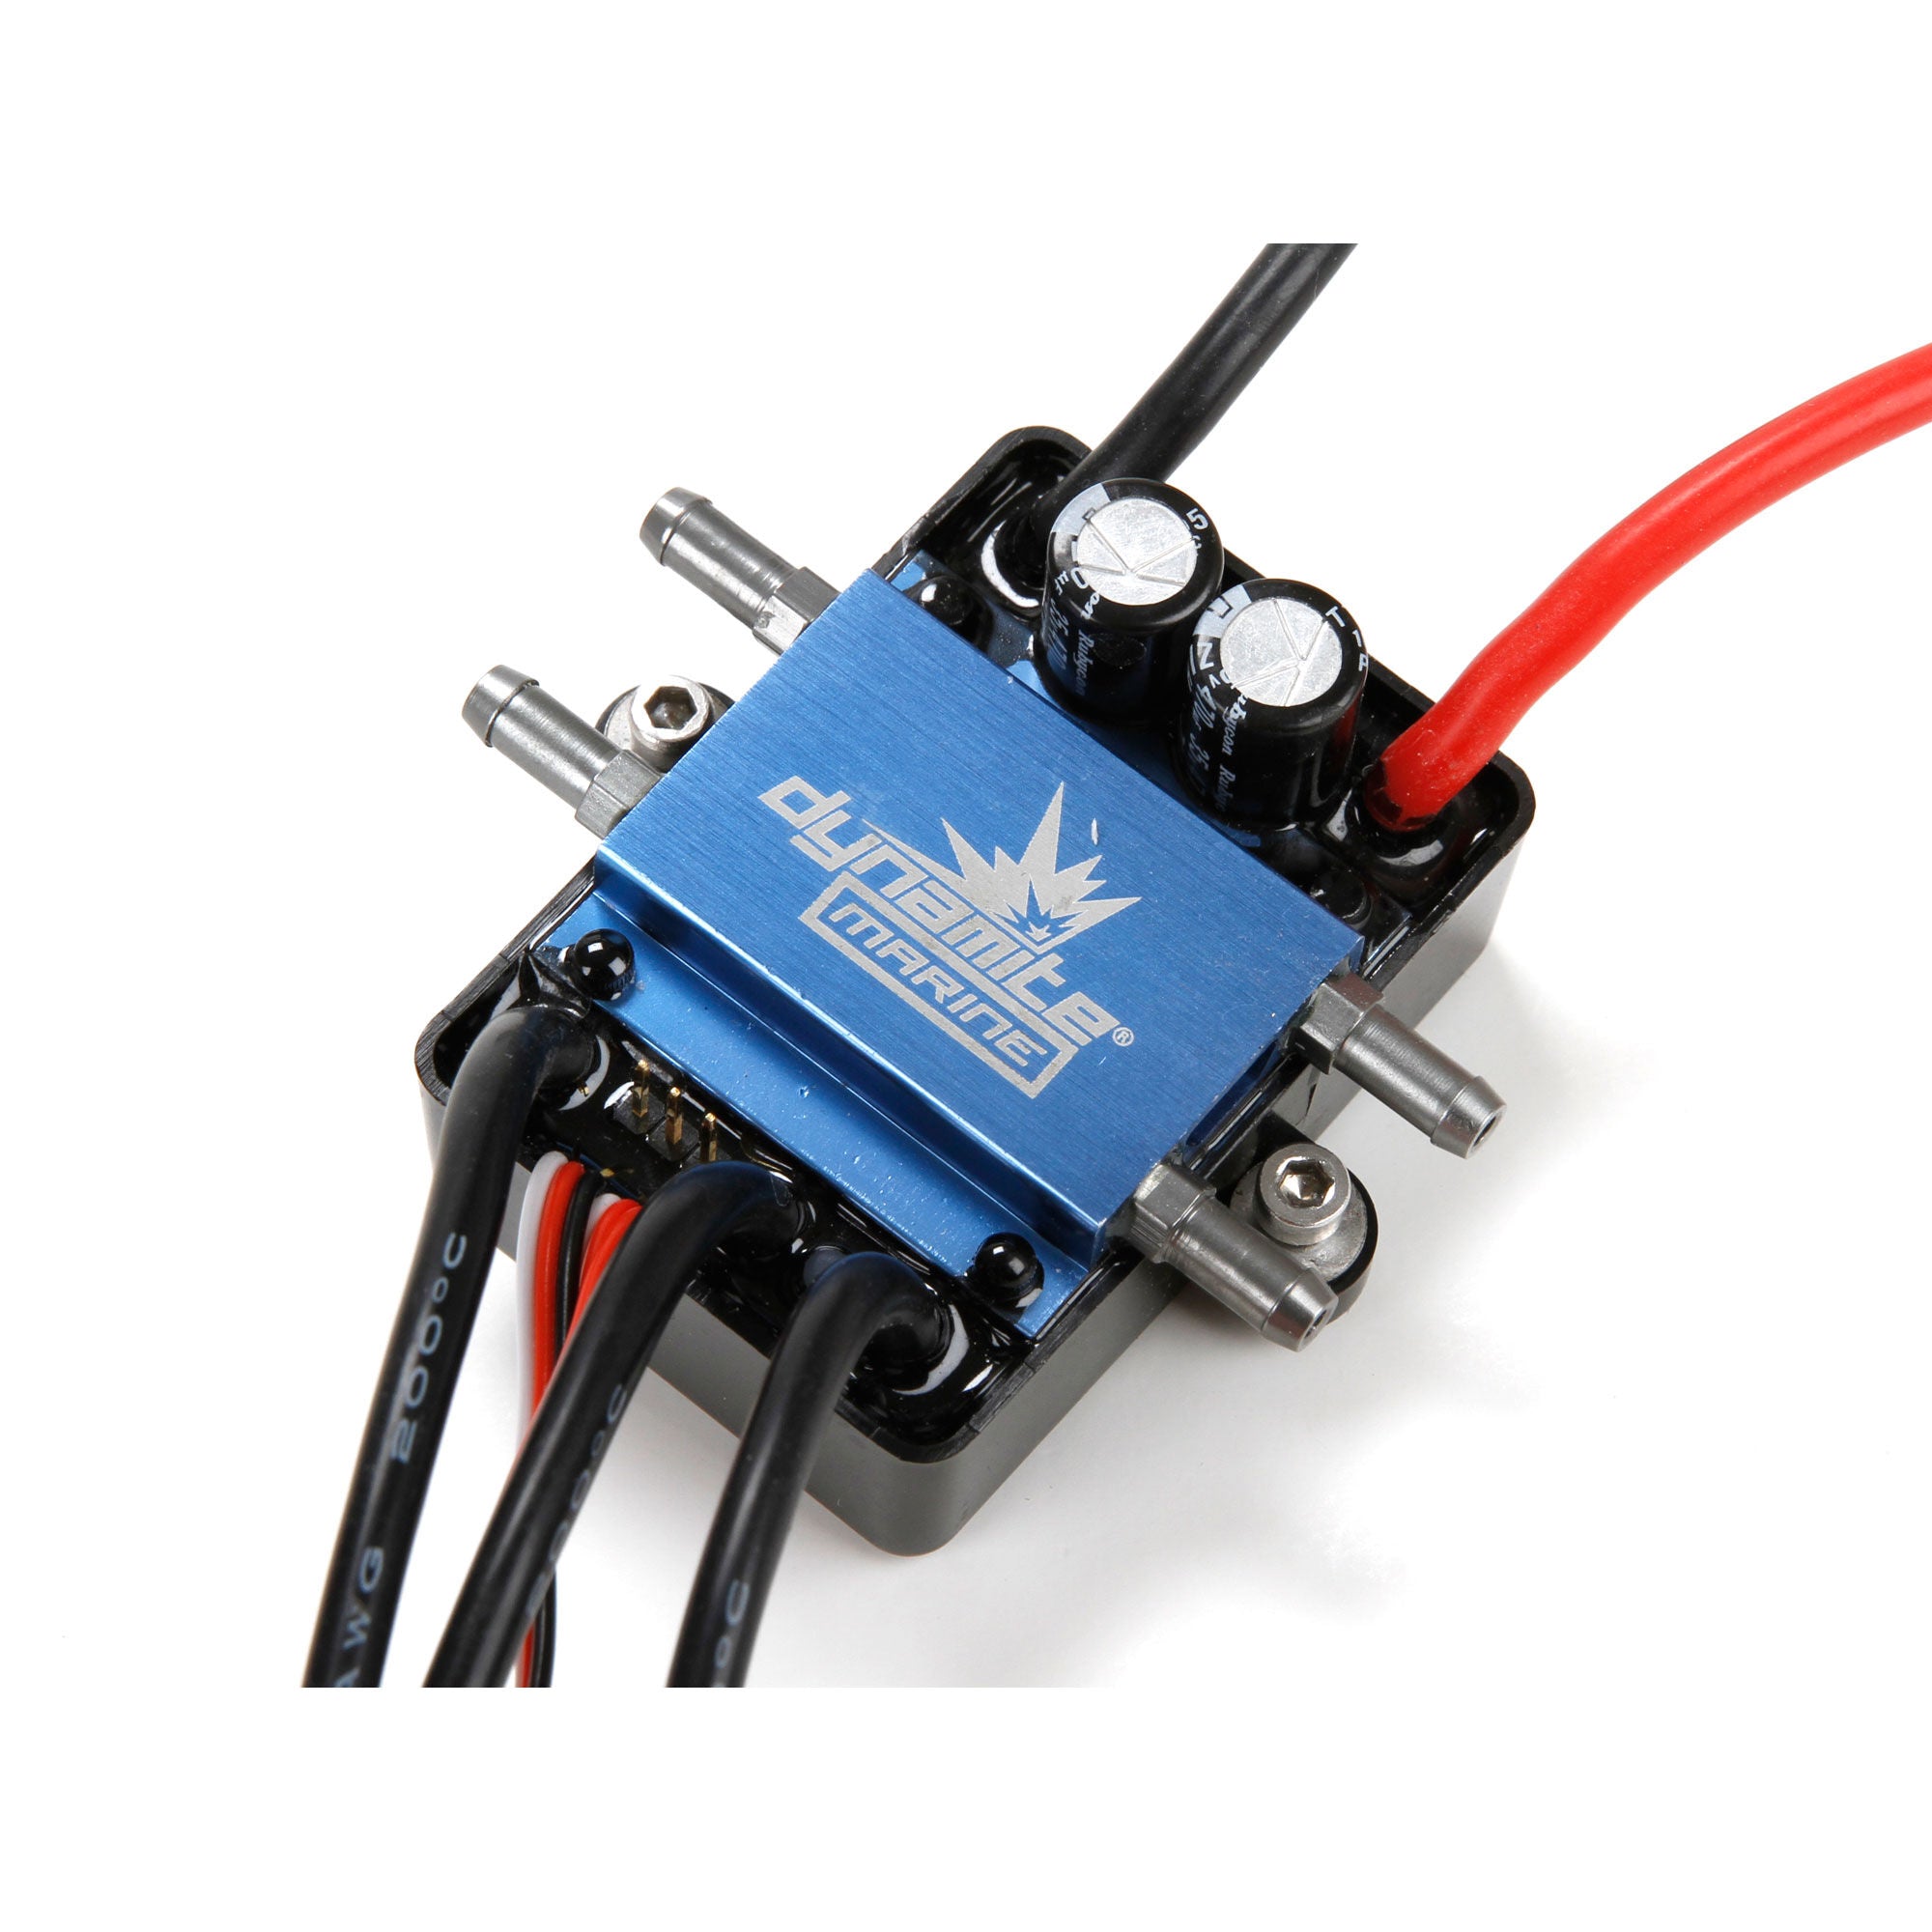 Dynamite DYNM3875 120A 2-6S Brushless Marine ESC Dual Connector